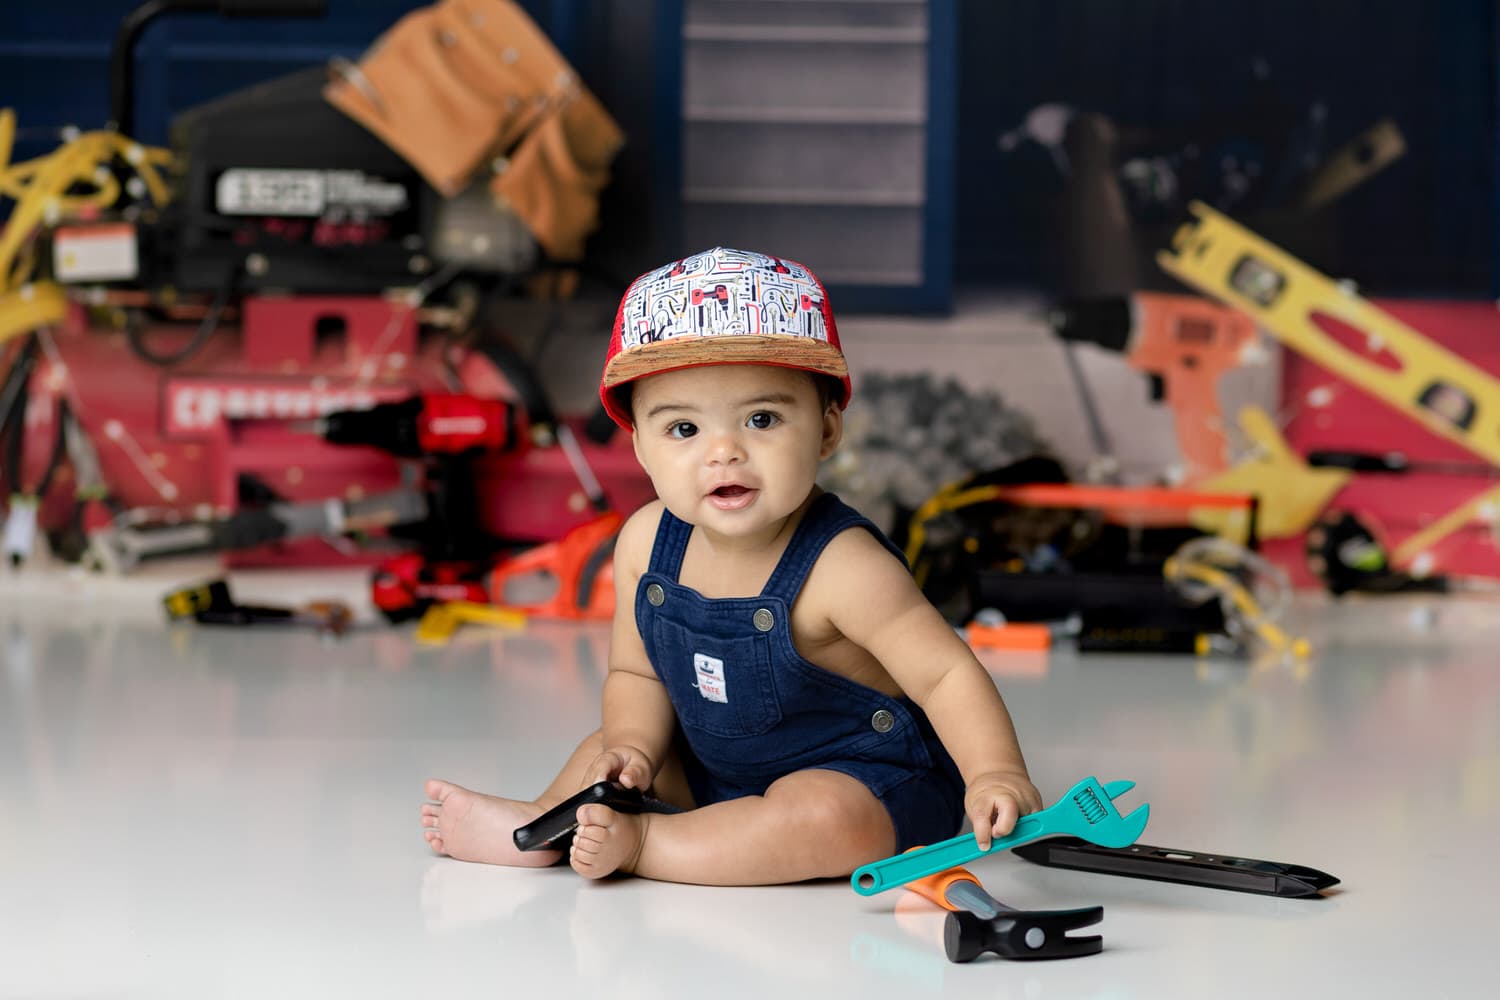 6 month old baby boy on a tool themed photo set